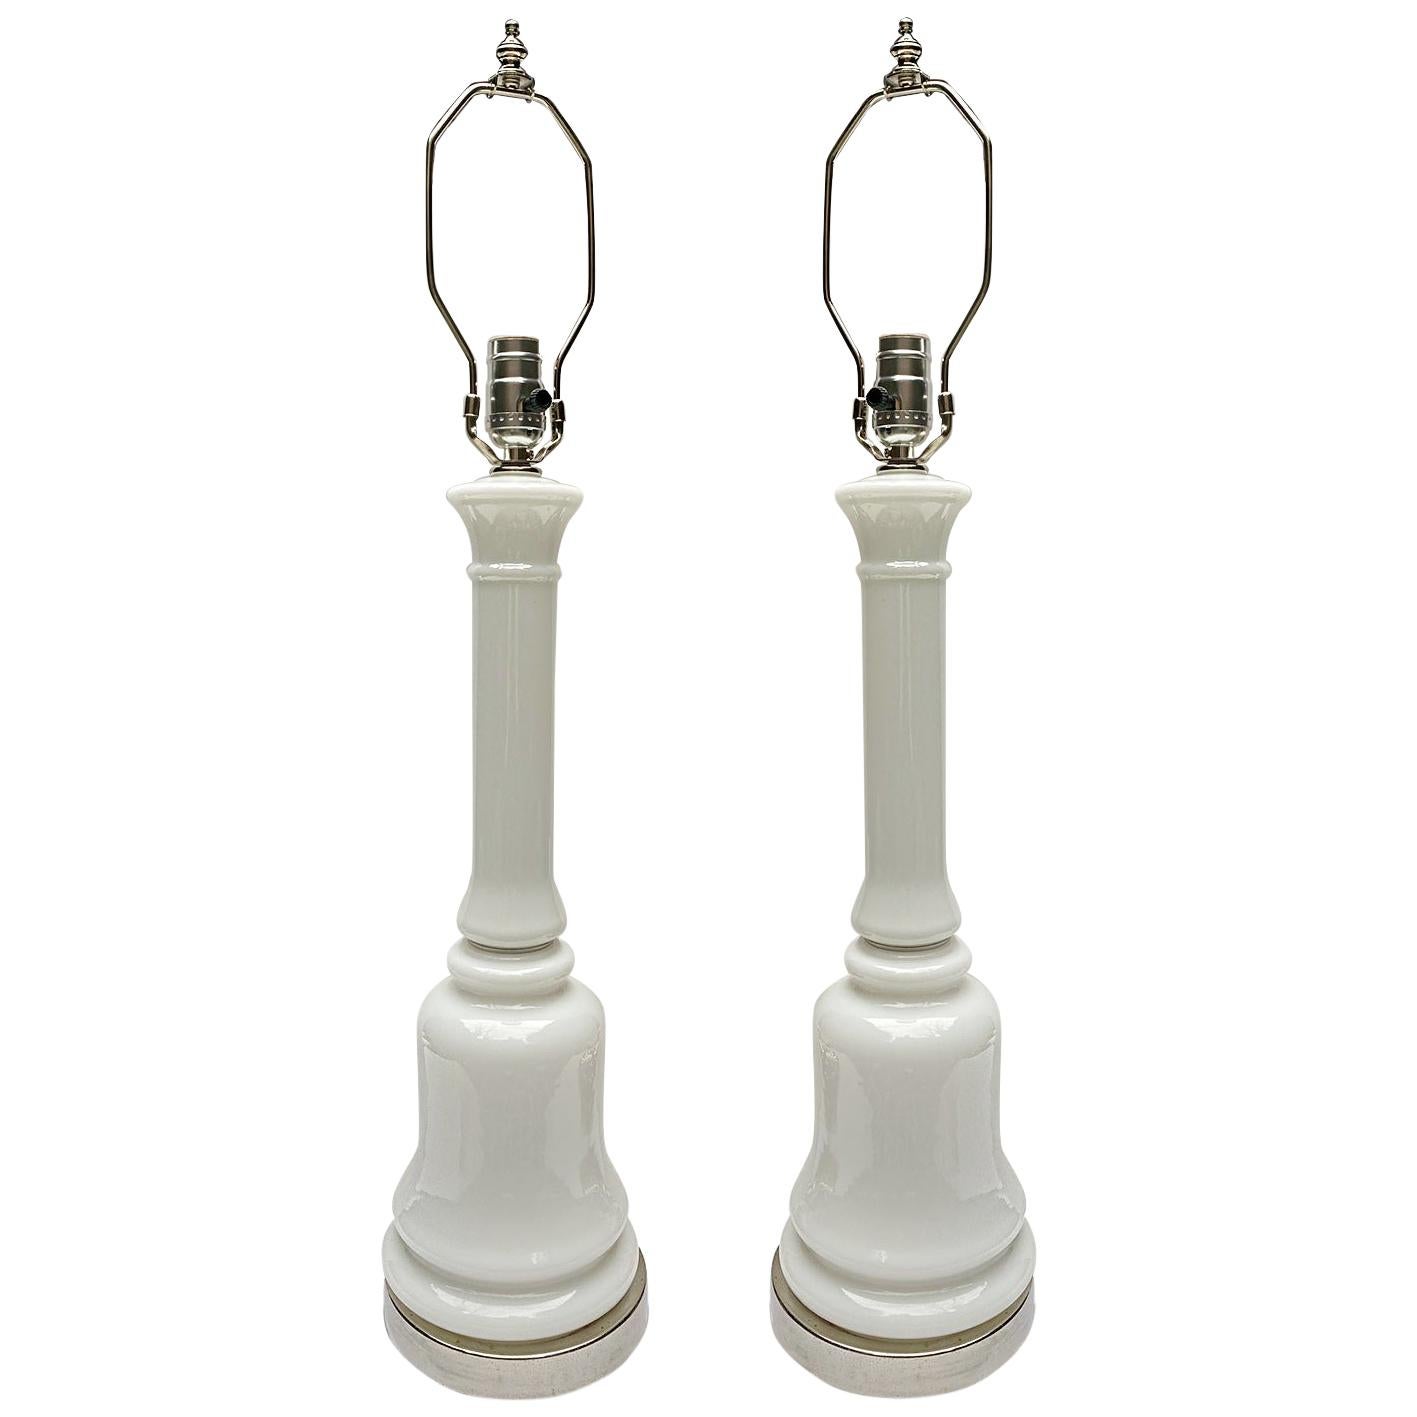 Pair of French White Opaline Lamps